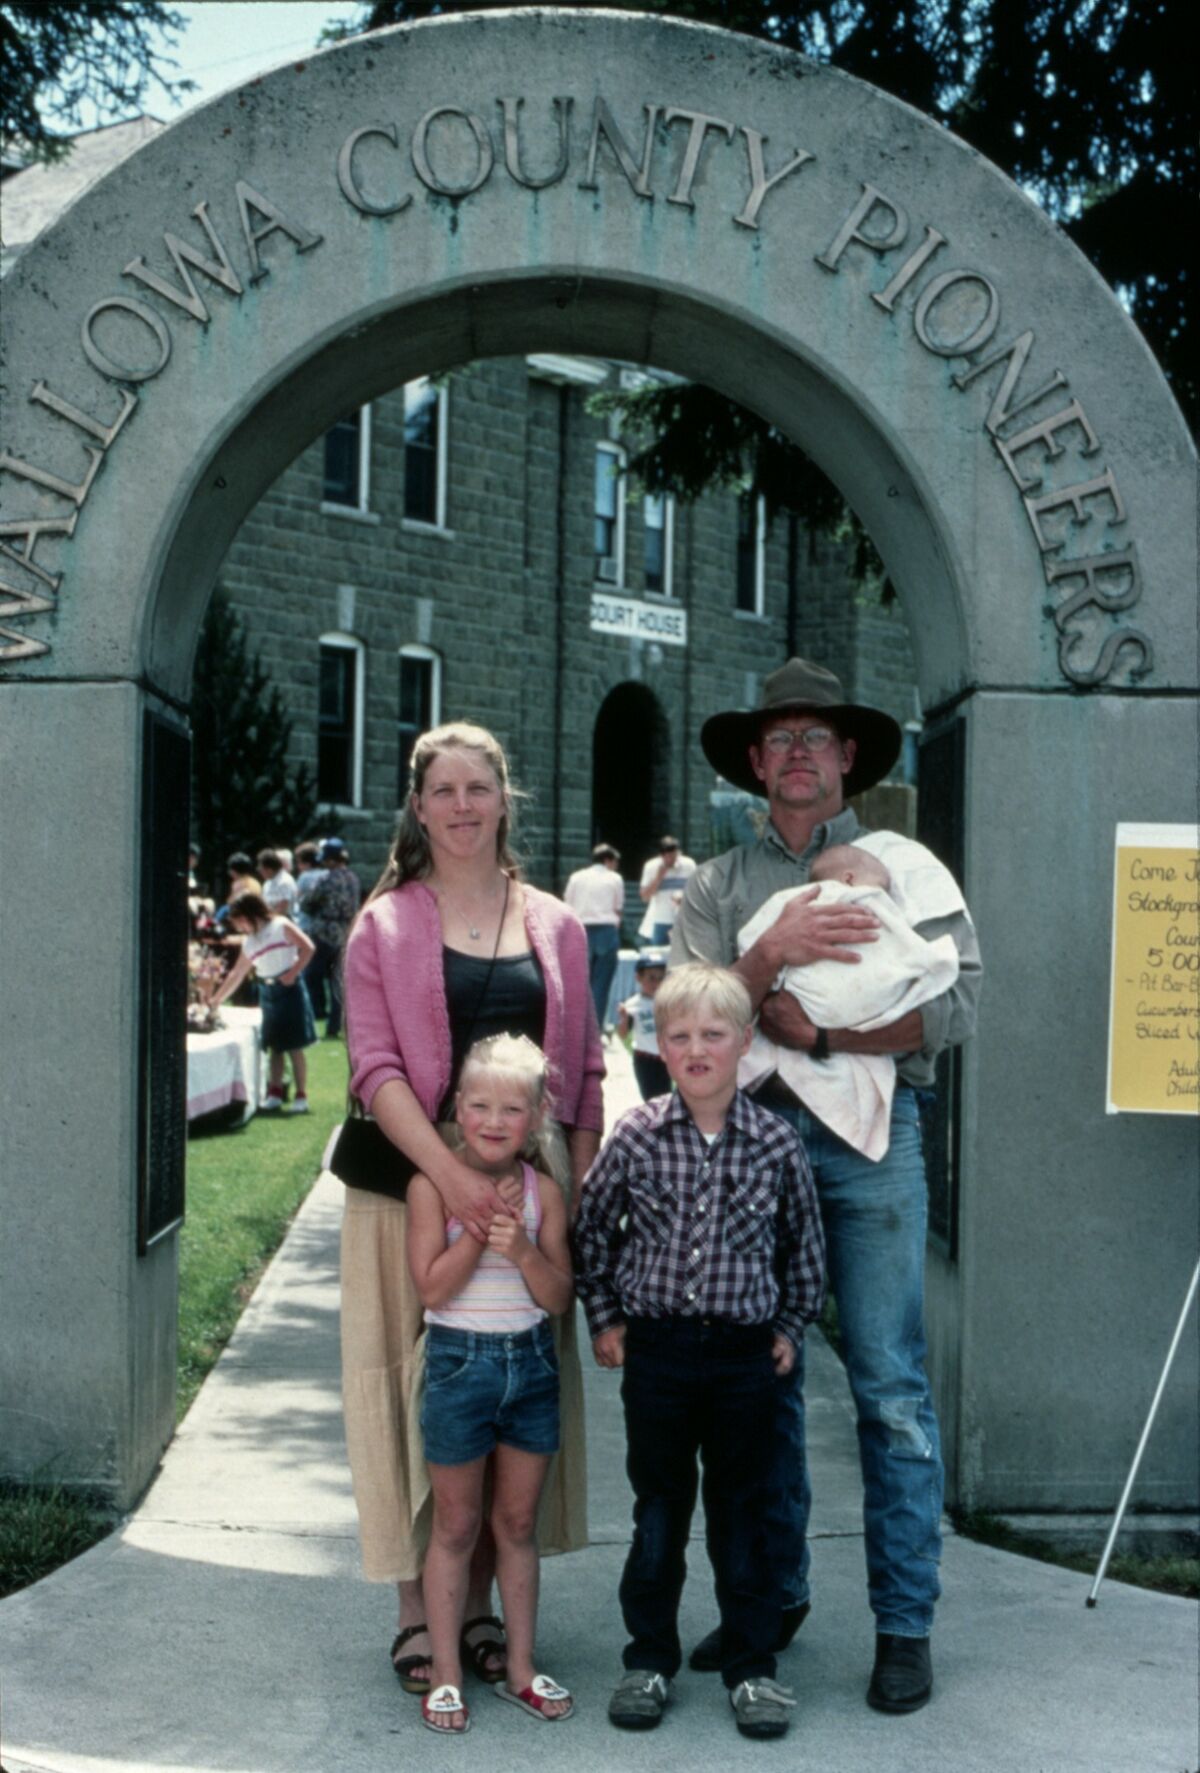 Sarah and Mike Hale stand with their children, Prairie Rose, Gabe, and Zeke, in the Pioneers arch at the Wallowa County Courthouse in Enterprise. Taken by Janie Tippett.